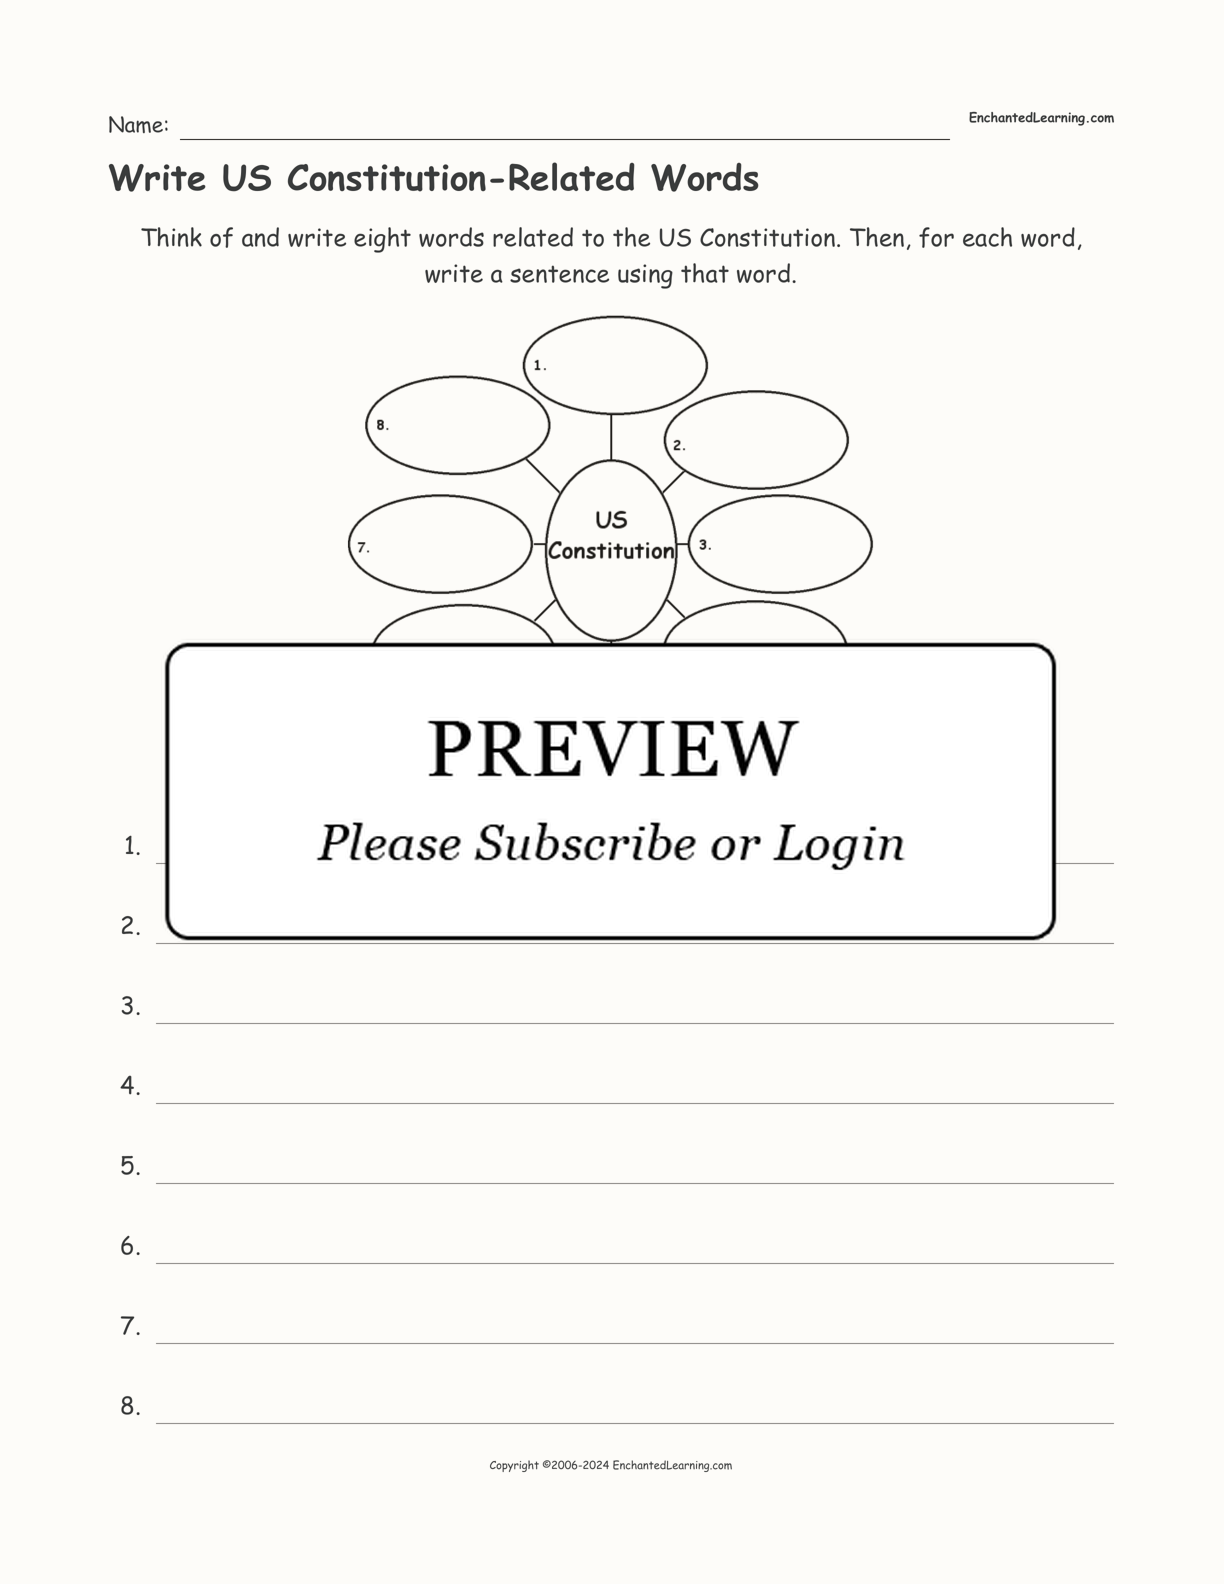 Write US Constitution-Related Words interactive worksheet page 1